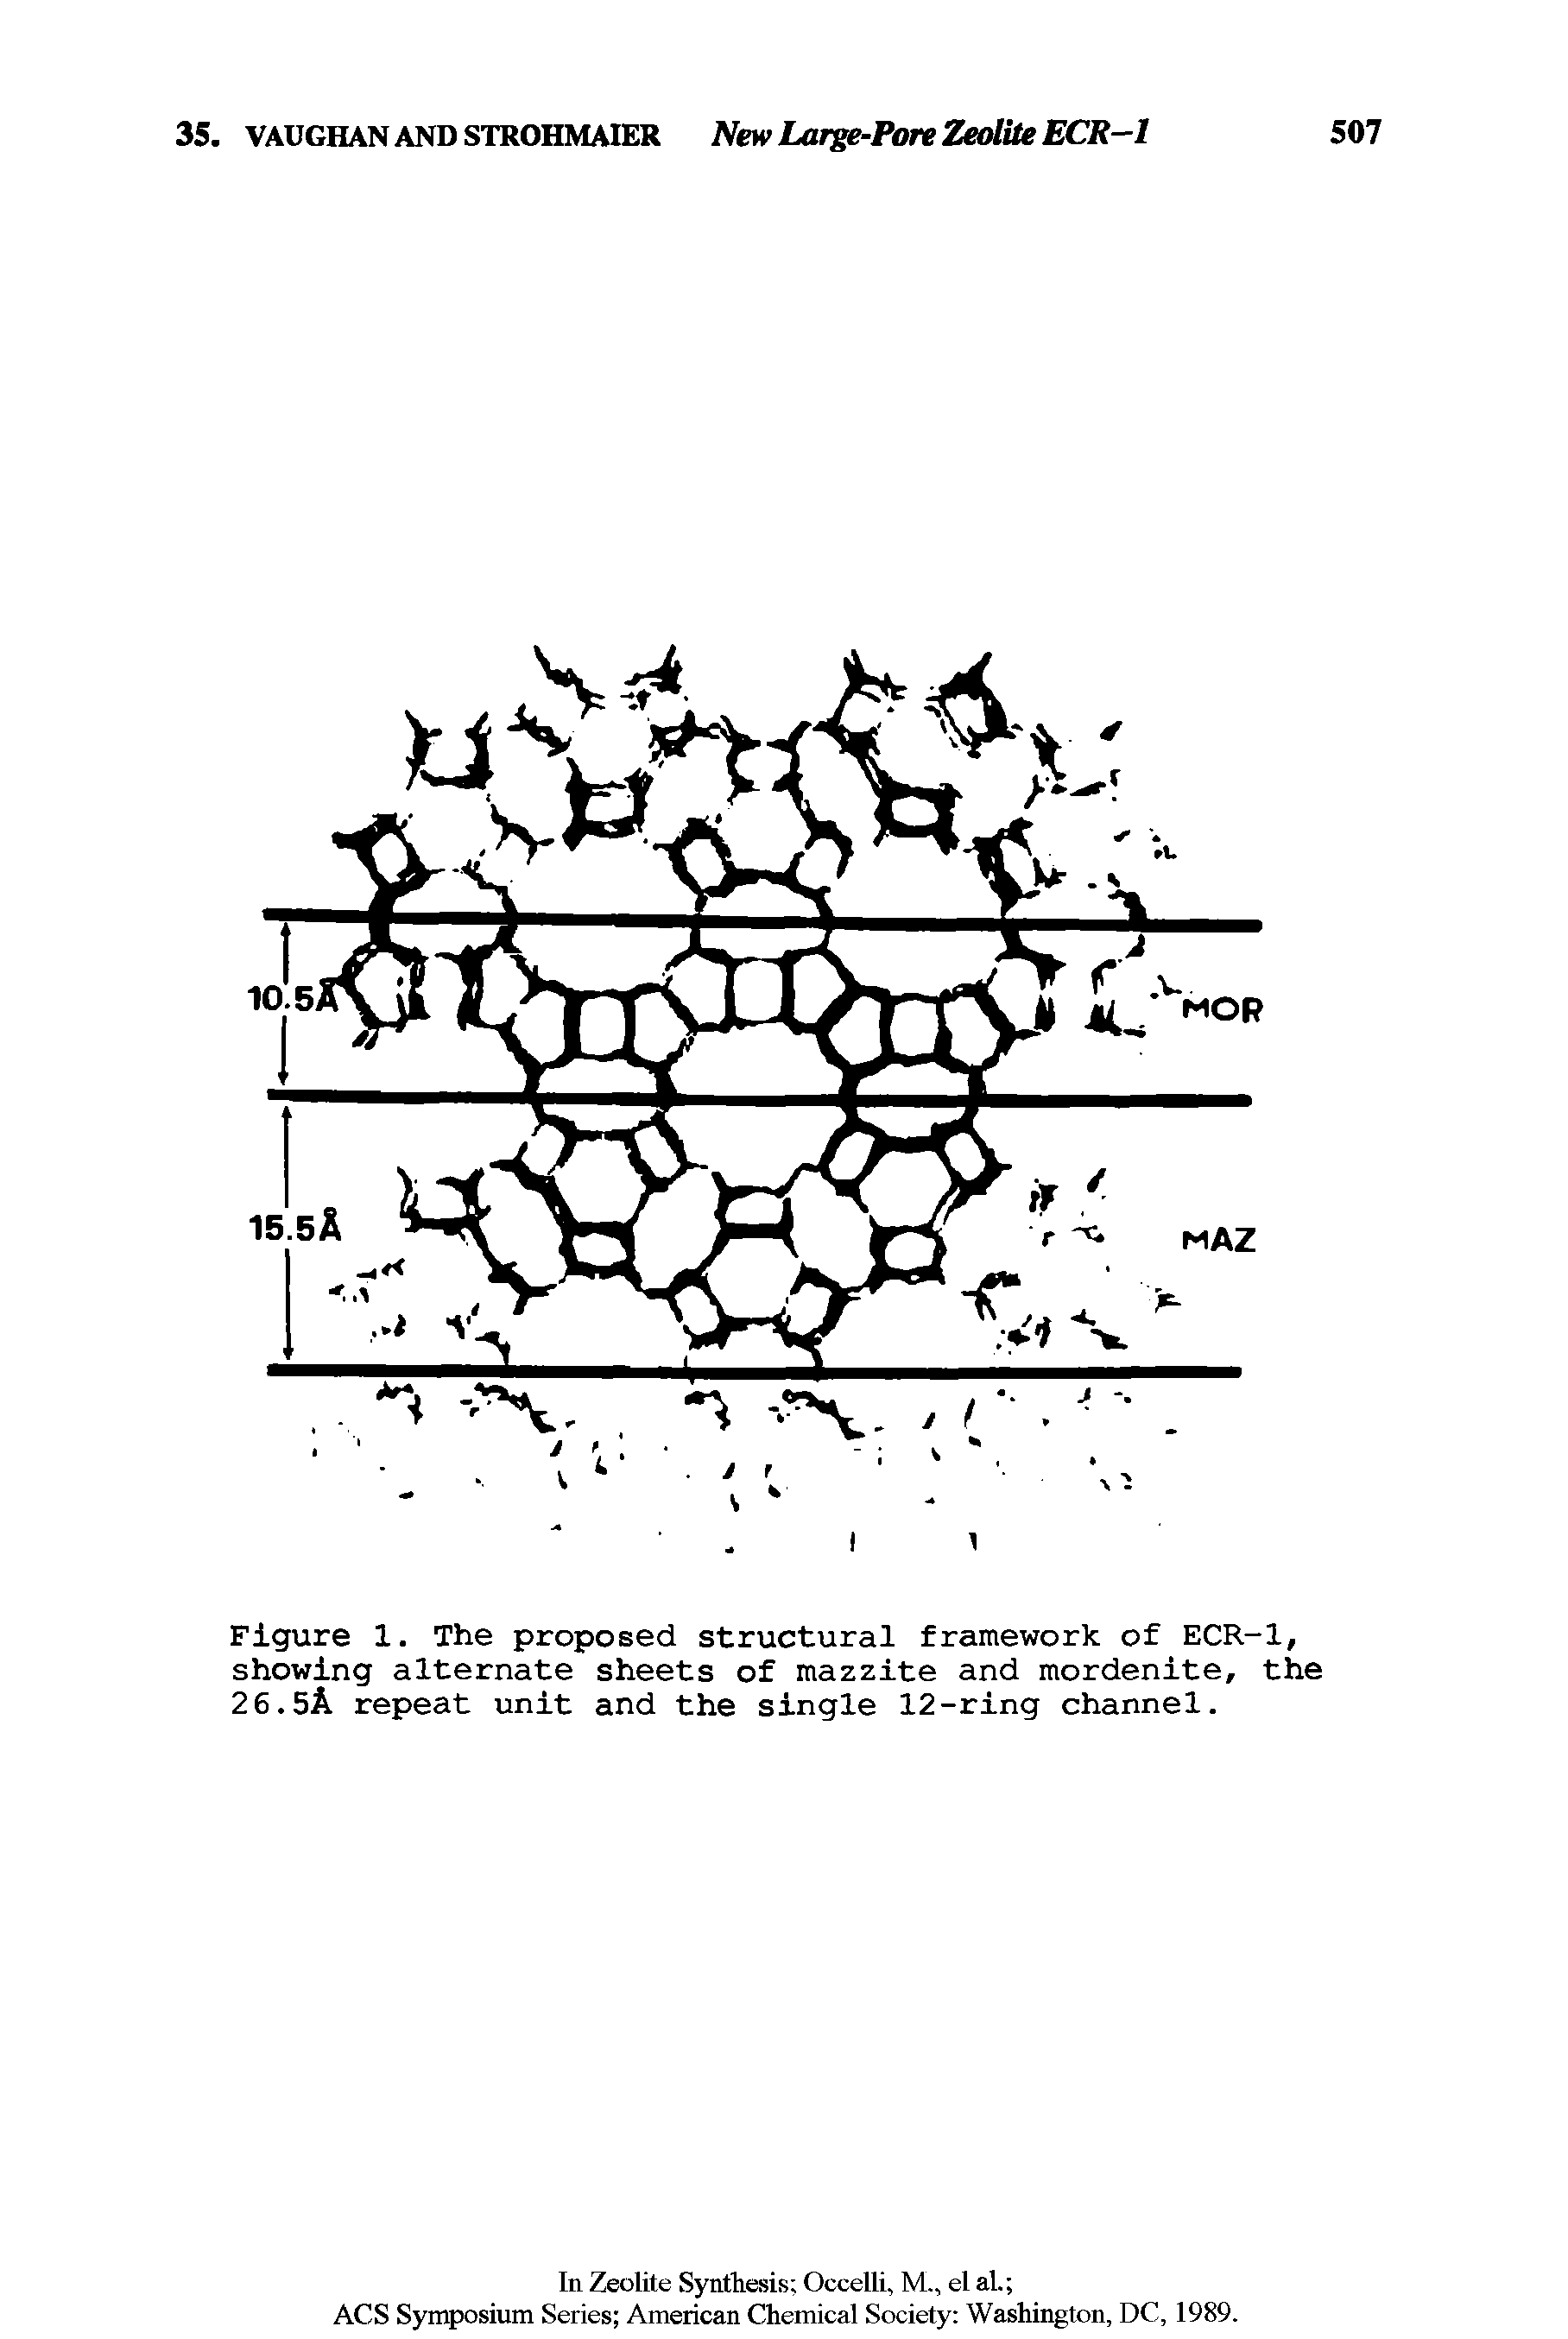 Figure 1. The proposed structural framework of ECR-1, showing alternate sheets of mazzite and mordenite, the 26.5A repeat unit and the single 12-ring channel.